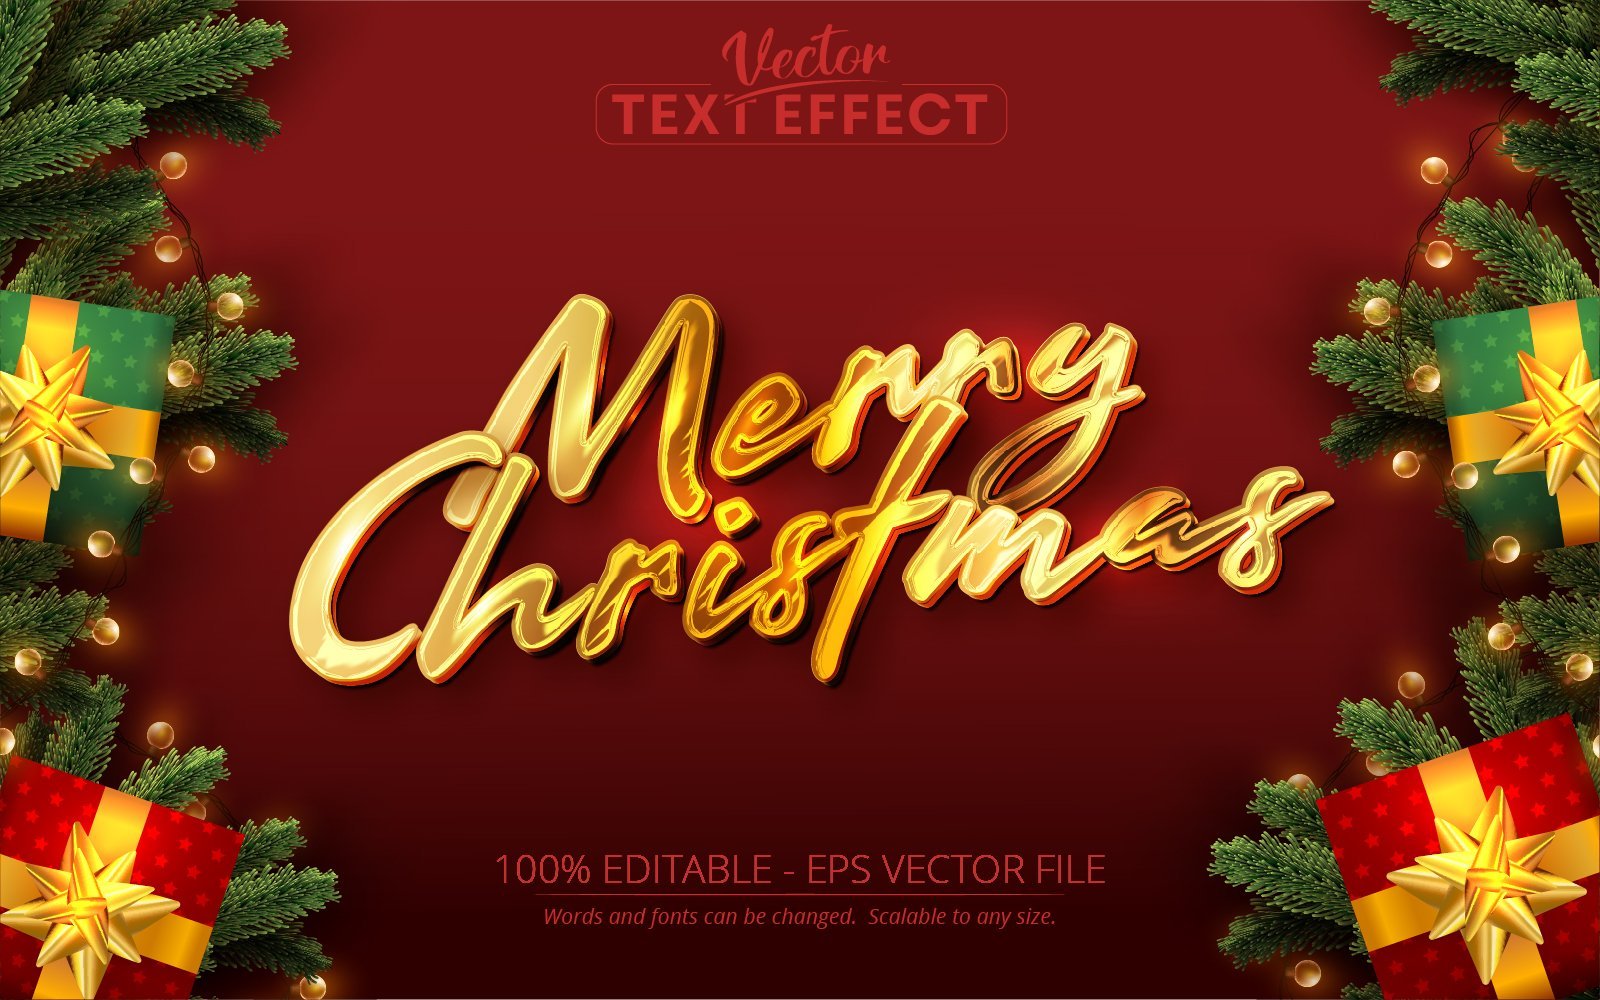 Template #217663 Effect 2022 Webdesign Template - Logo template Preview